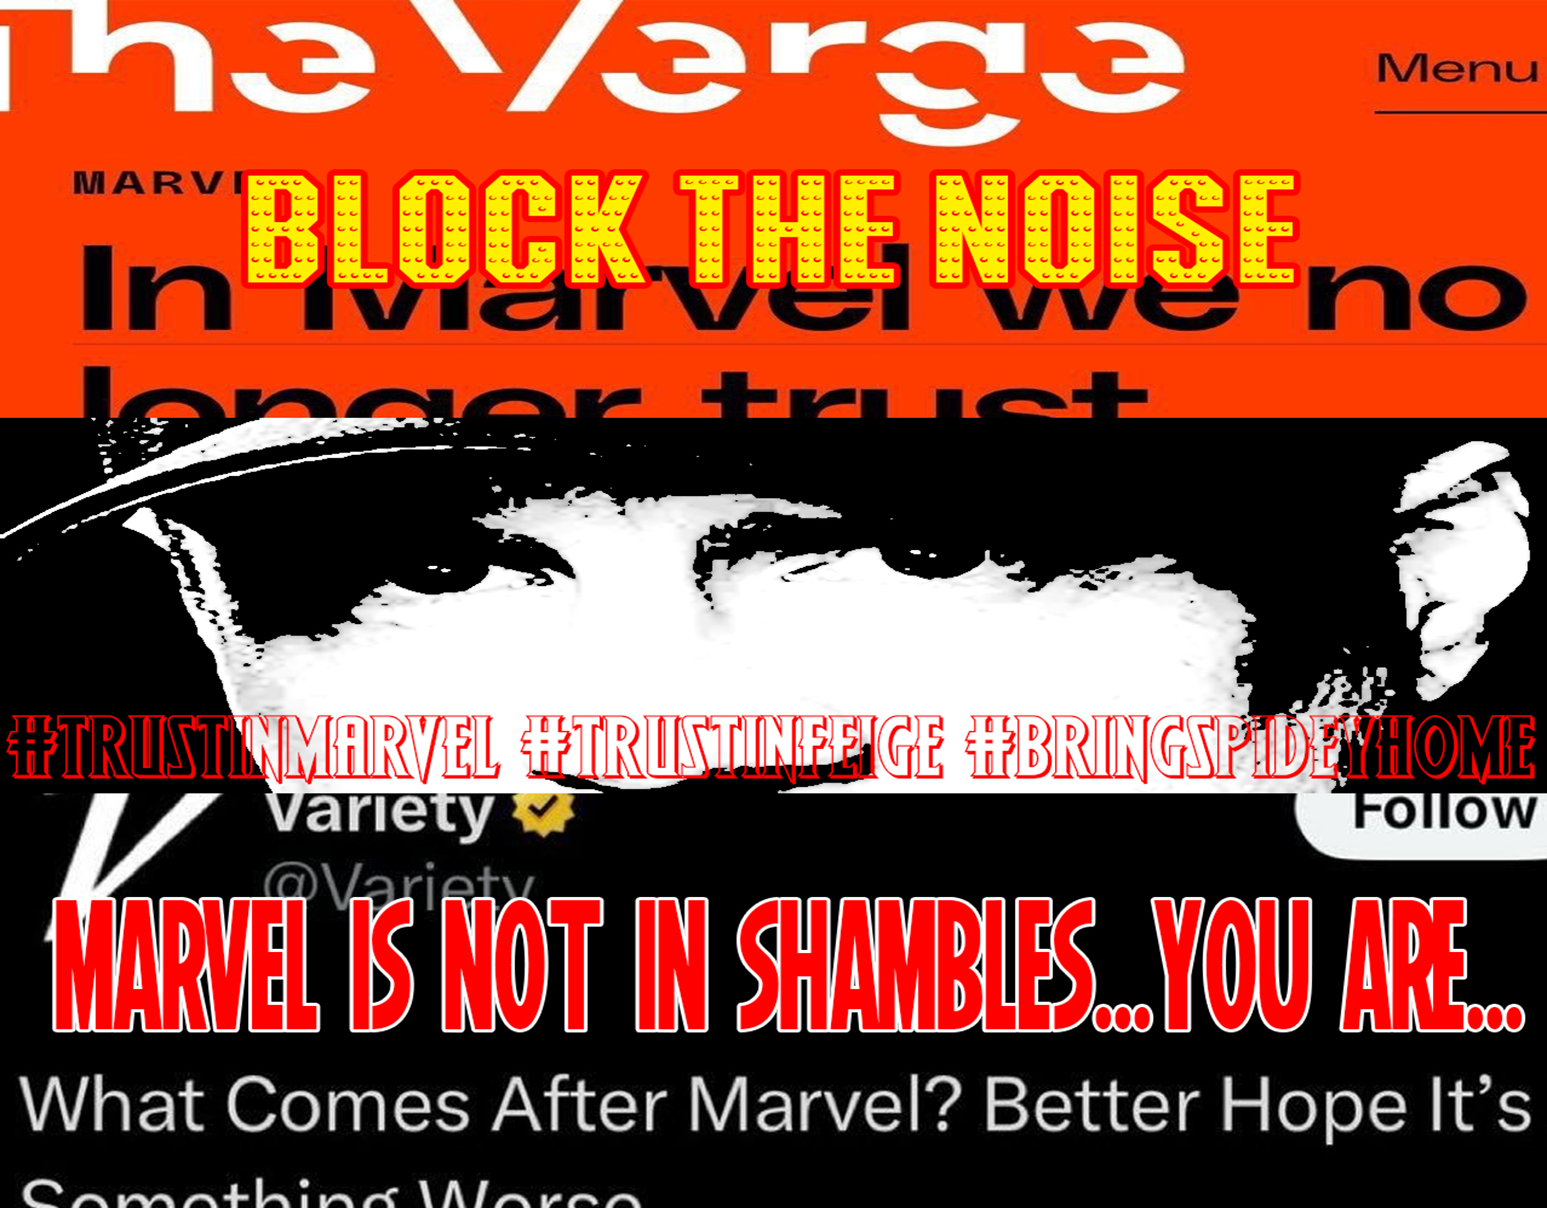 Marvel is not in shambles…YOU ARE…